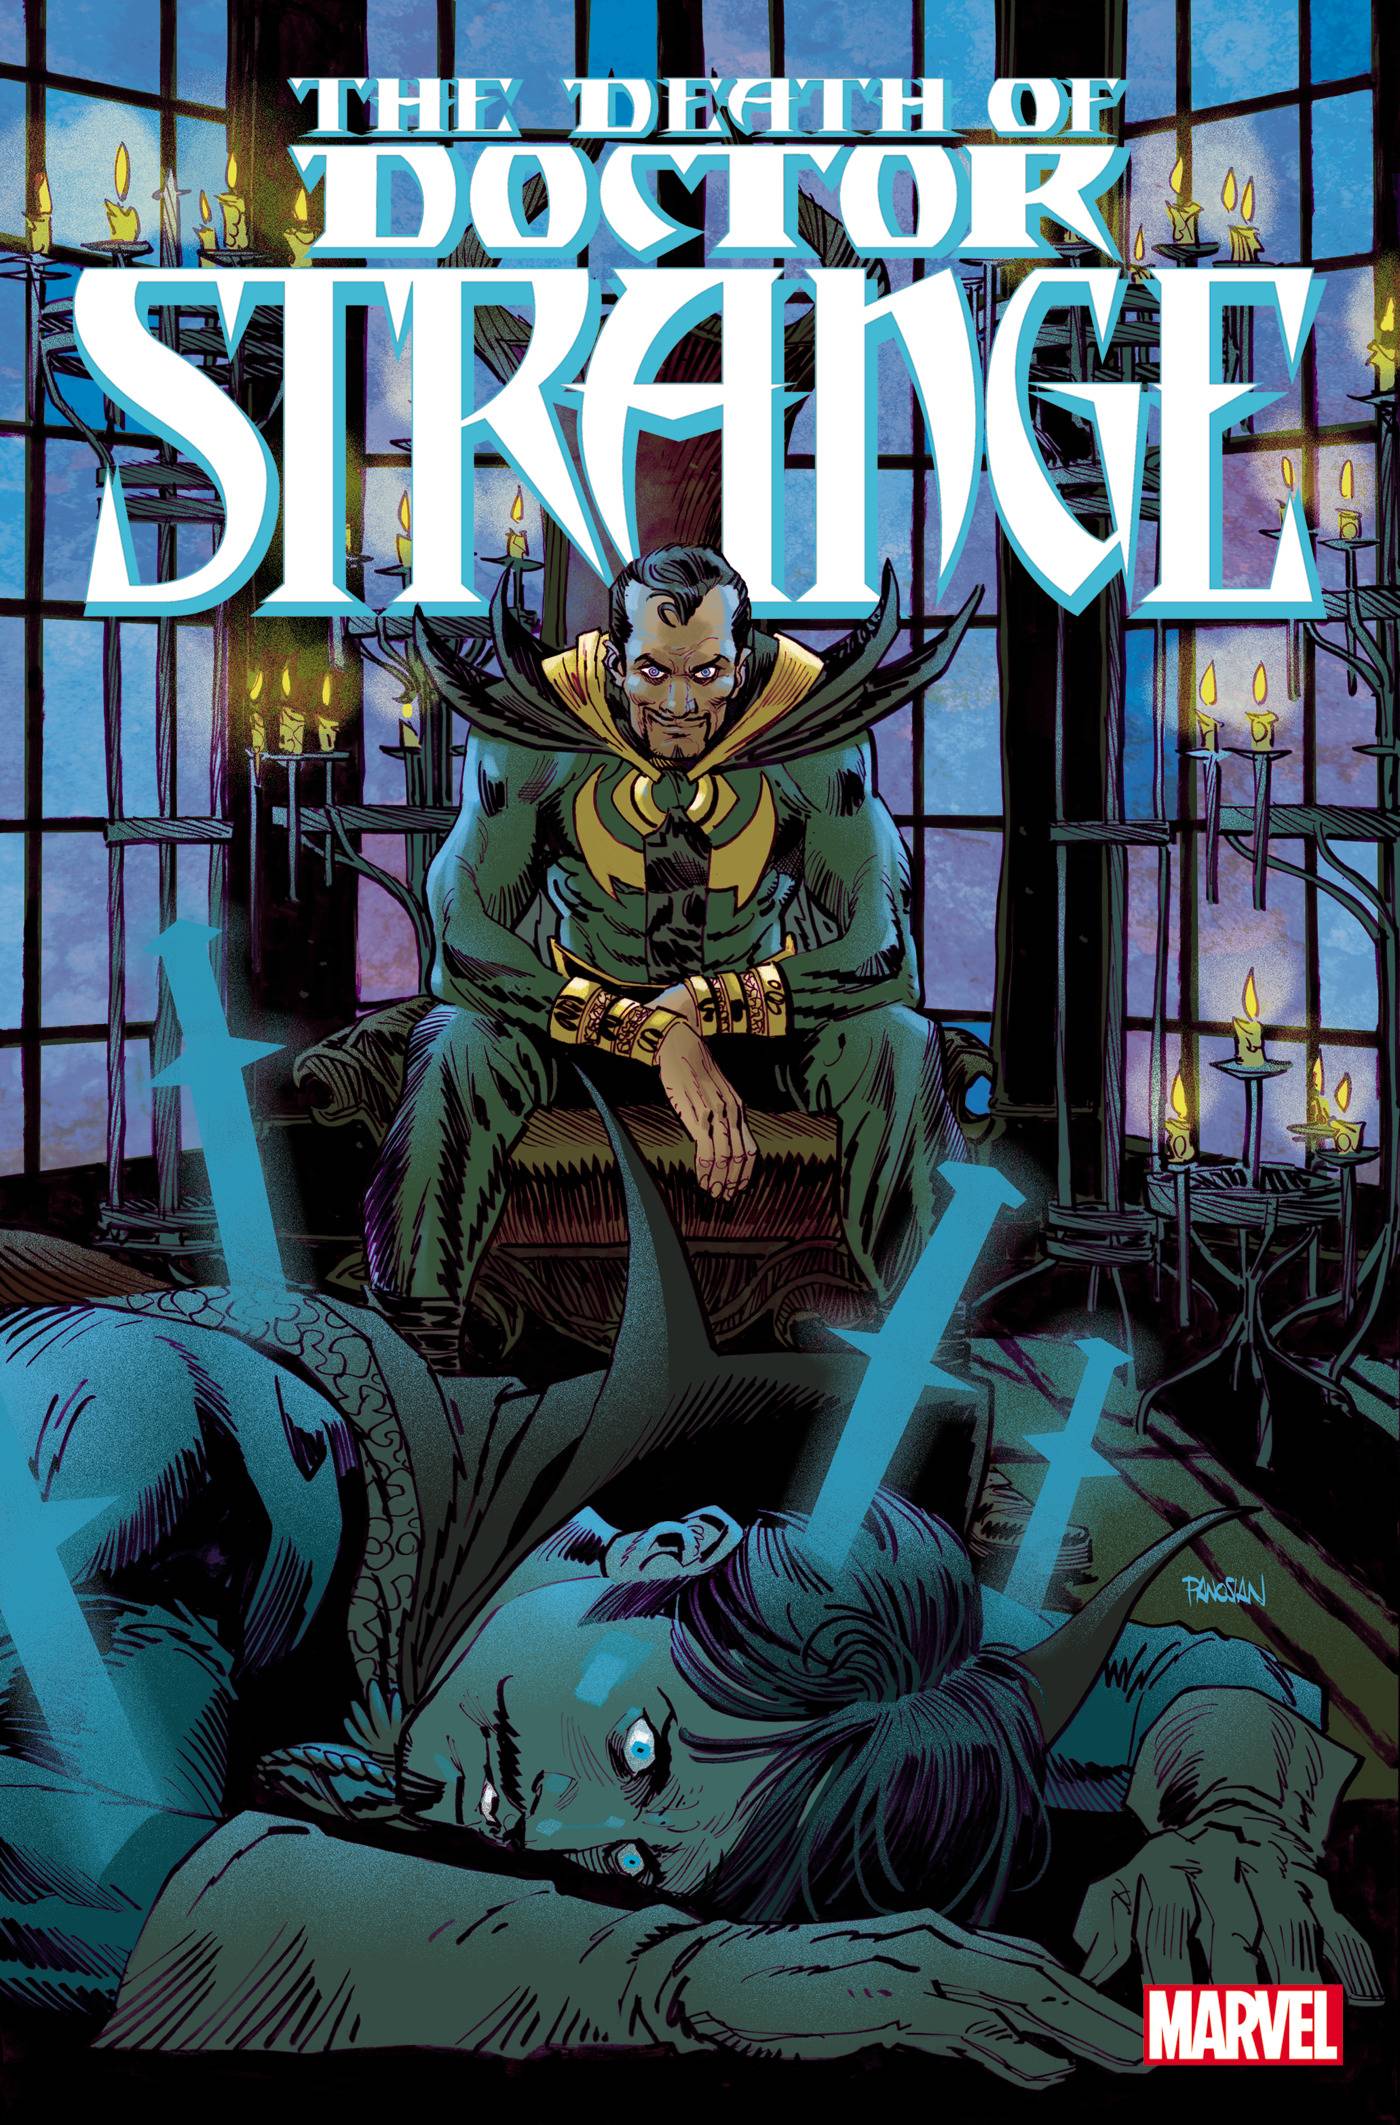 The Death of Doctor Strange #2 cover